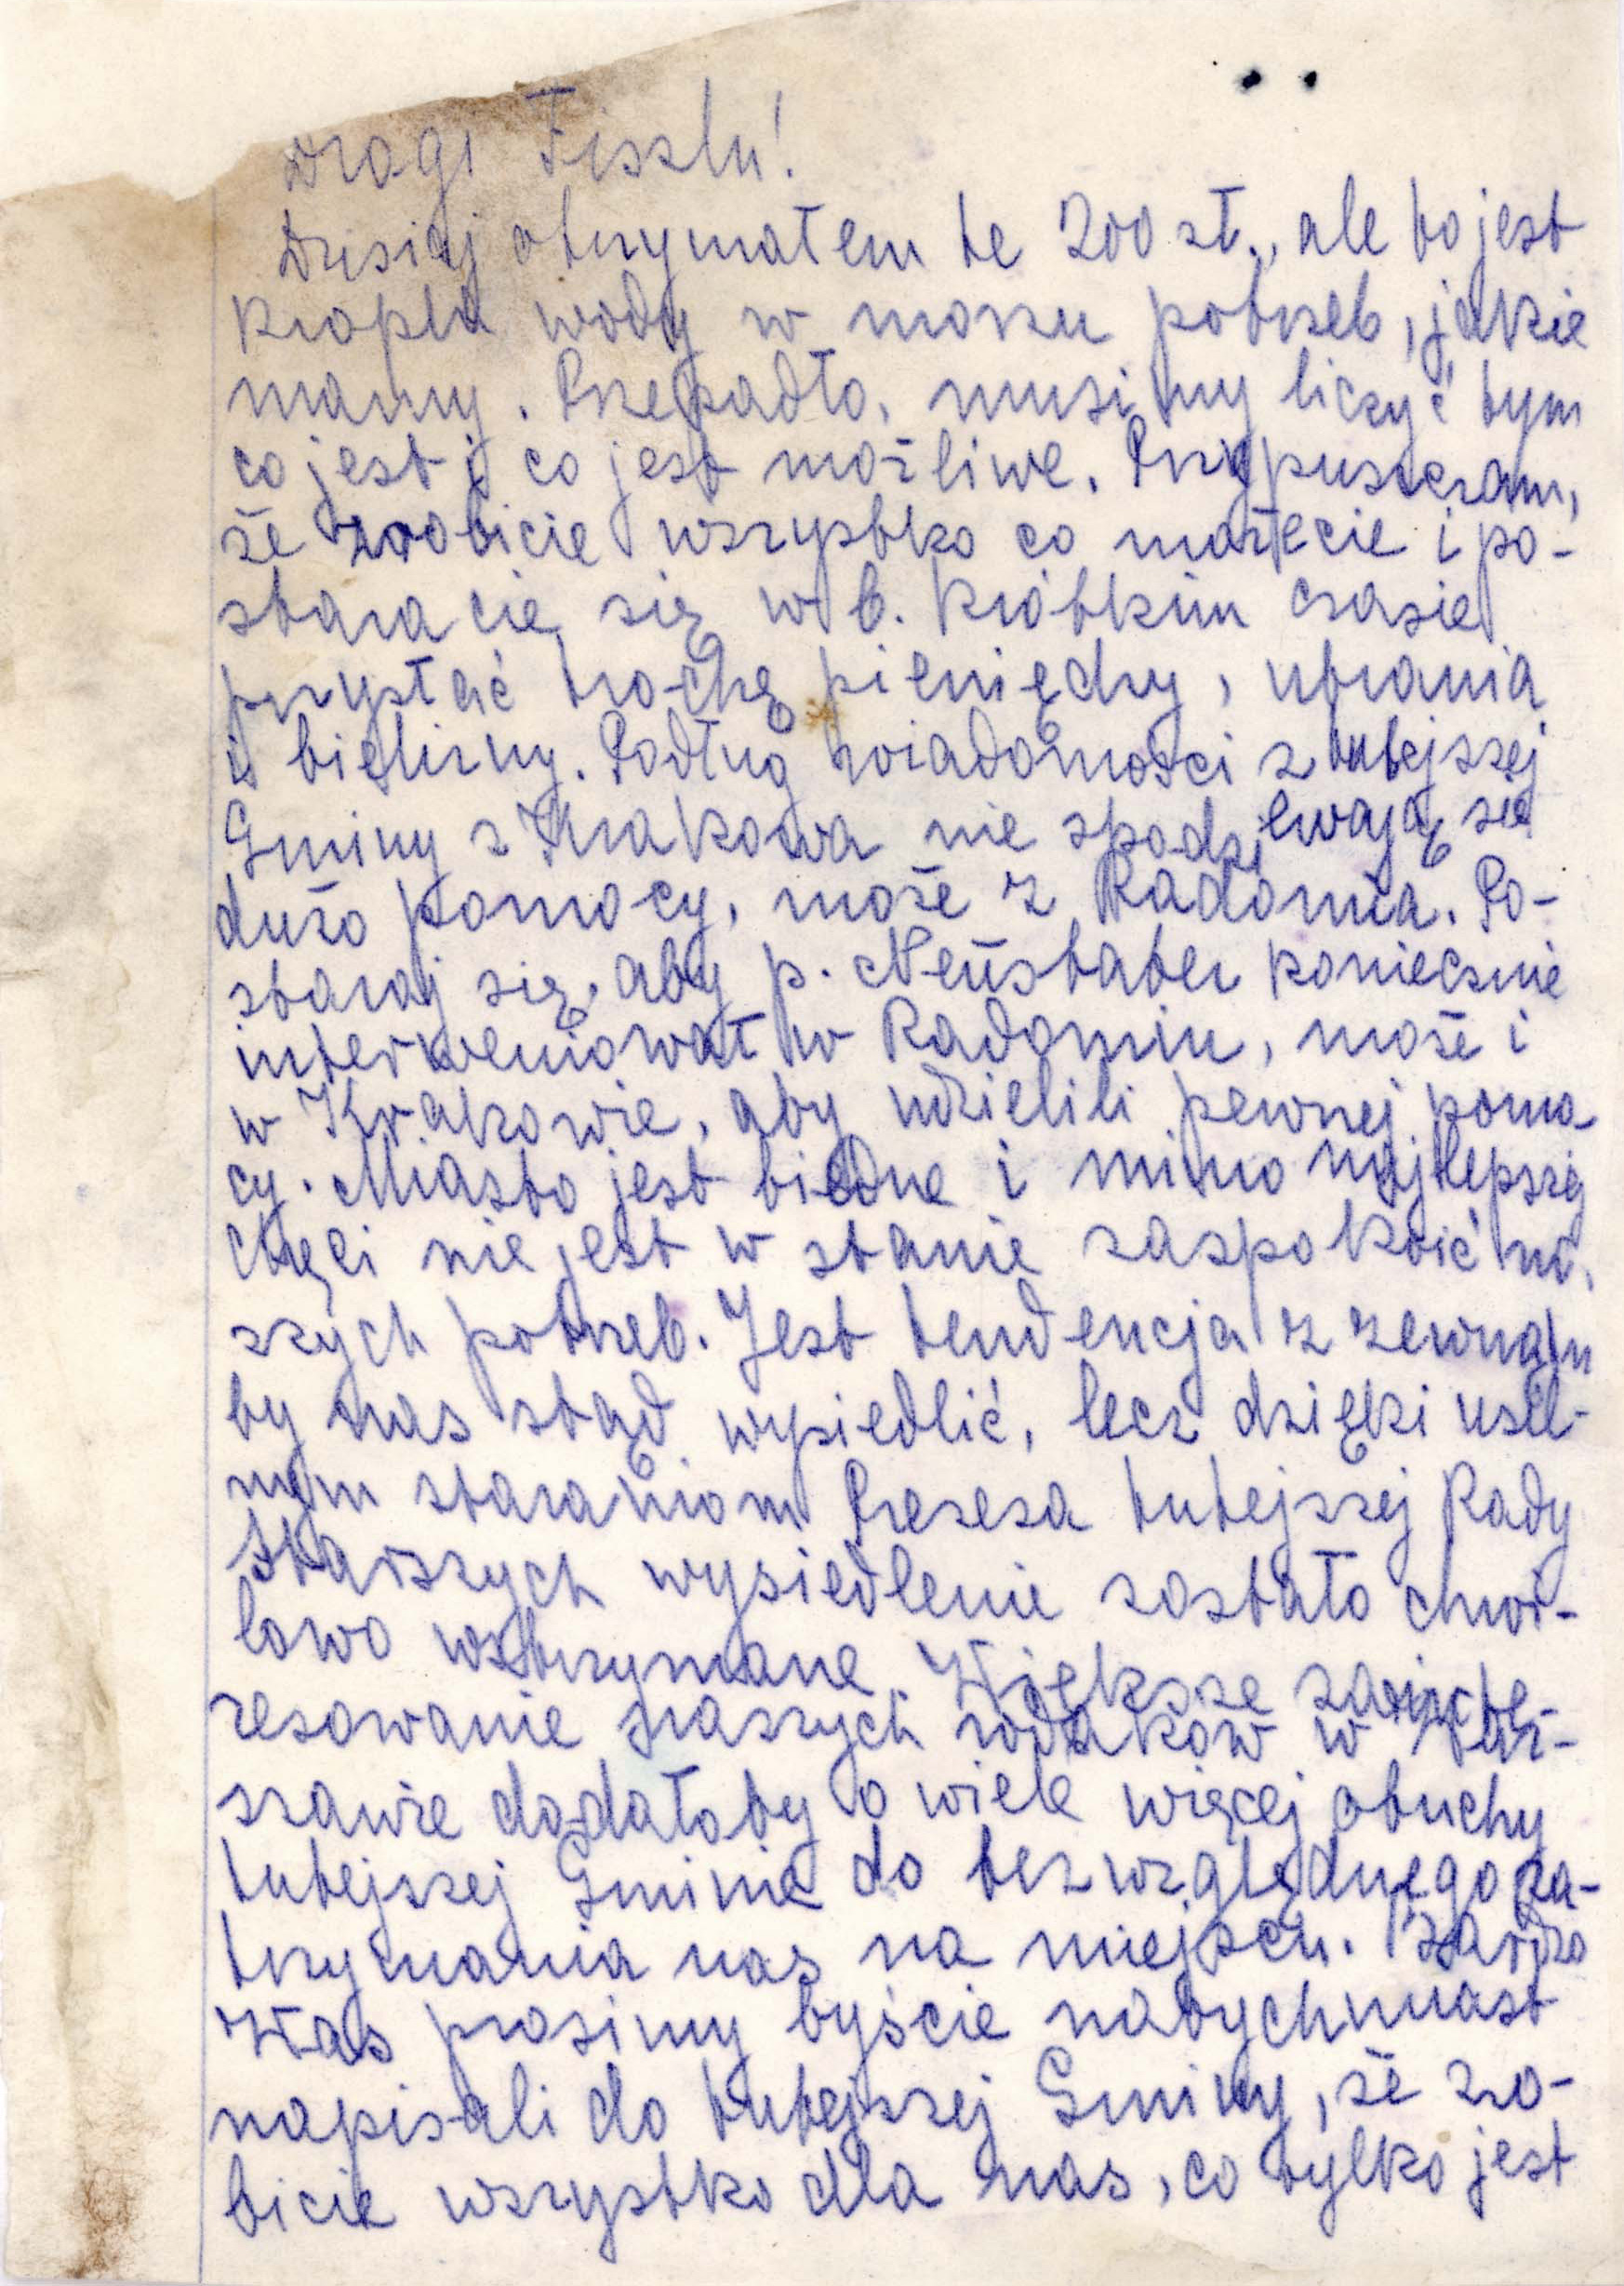 A letter sent by Jews of Plock who had been expelled to Zarki, requesting help from their Landsman Association in Warsaw, March 2, 1941